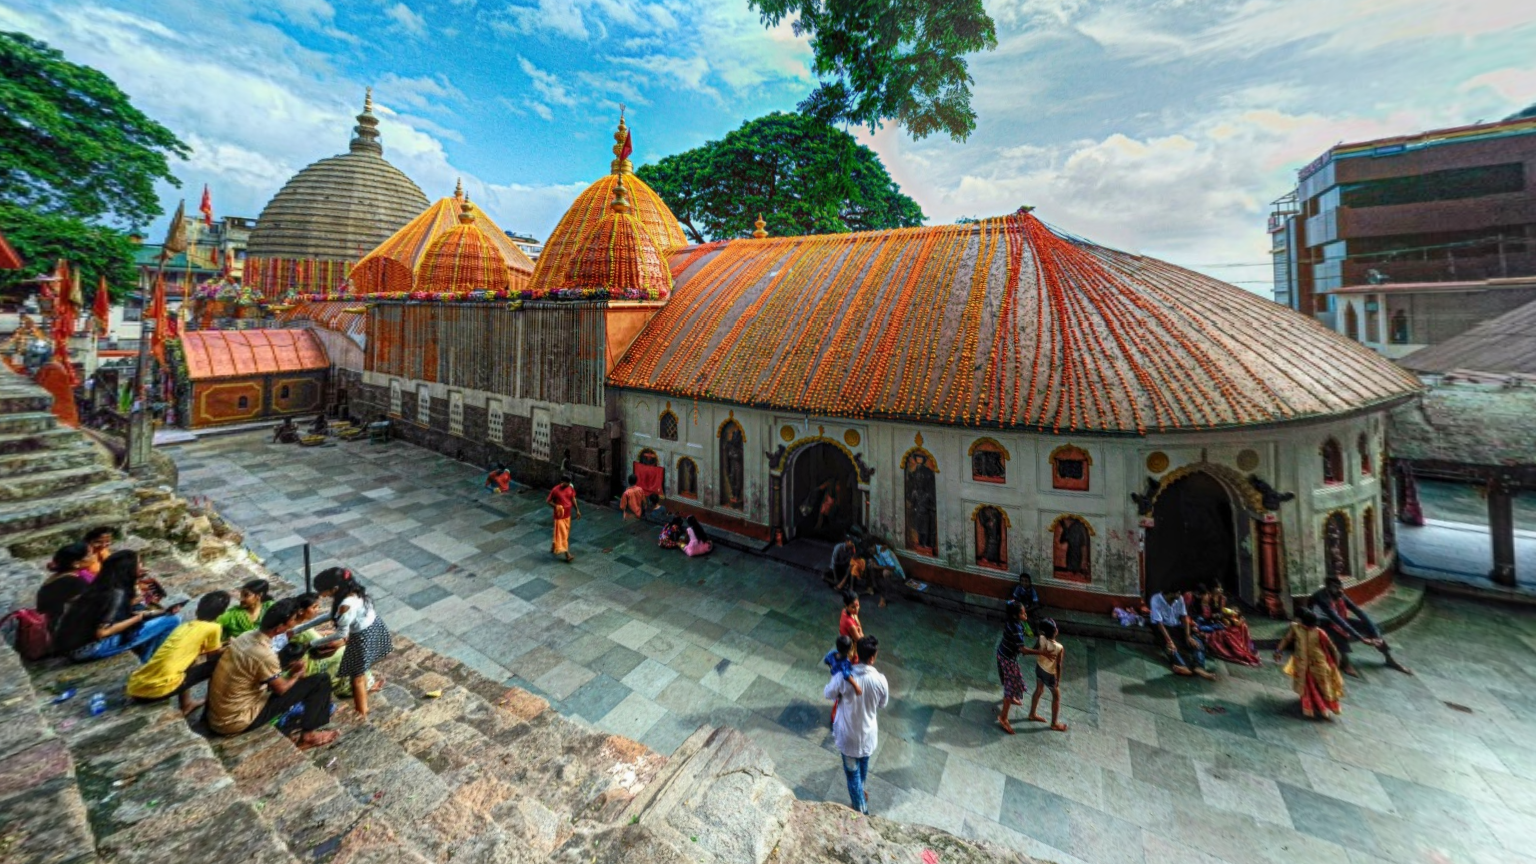 Kamakhya Mandir is one of most visited and famous places to visit in Assam.